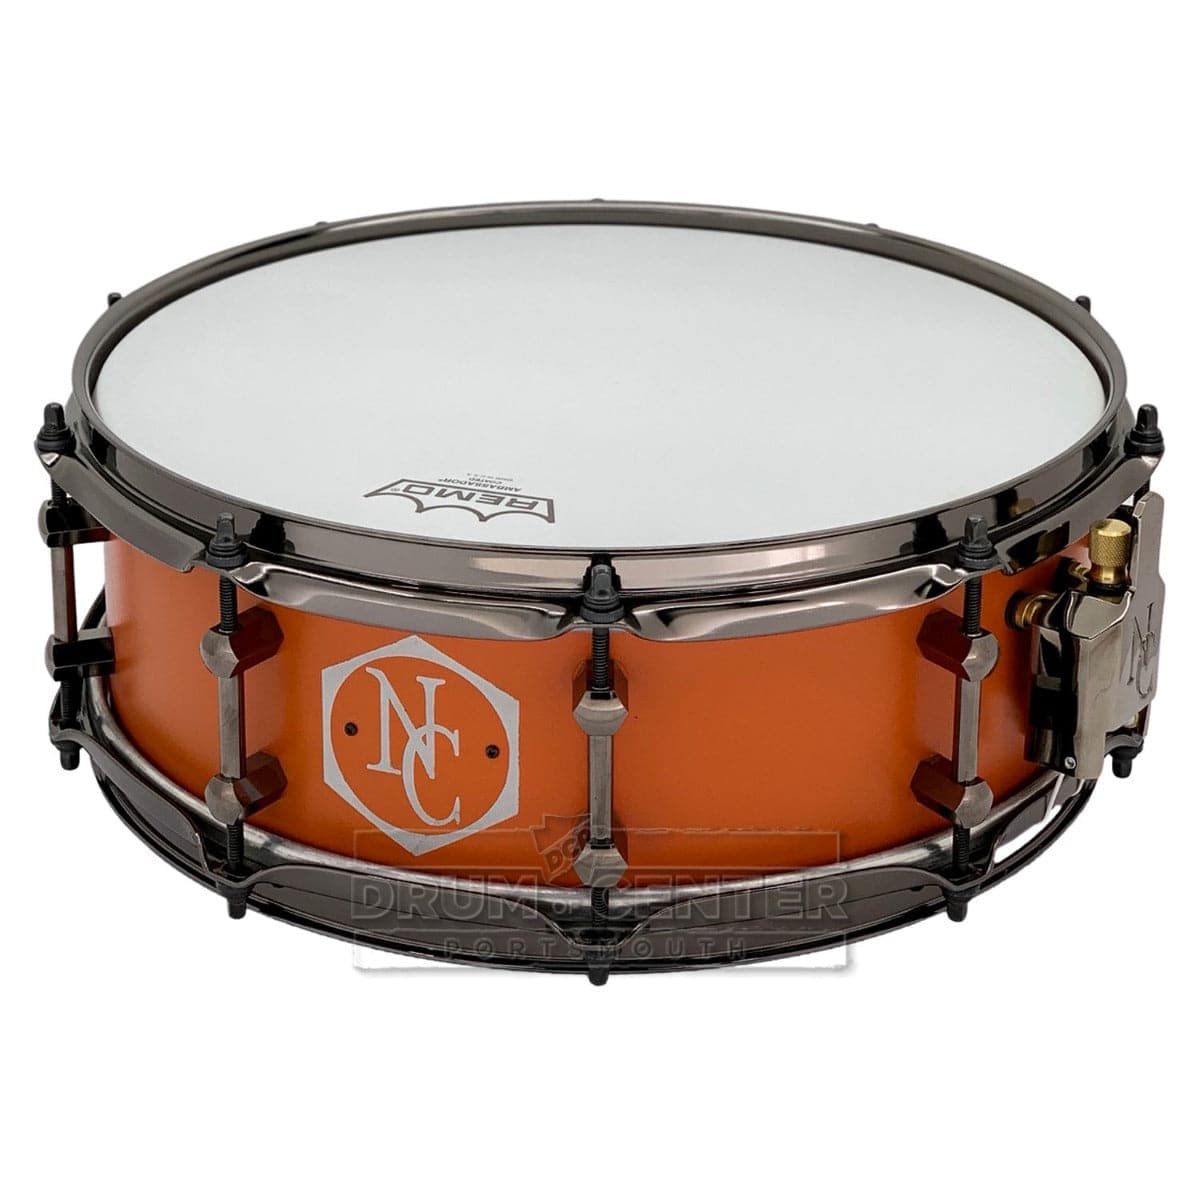 Noble & Cooley Alloy Classic Painted Snare Drum 14x4.75 Flat Orange w/Black Hw